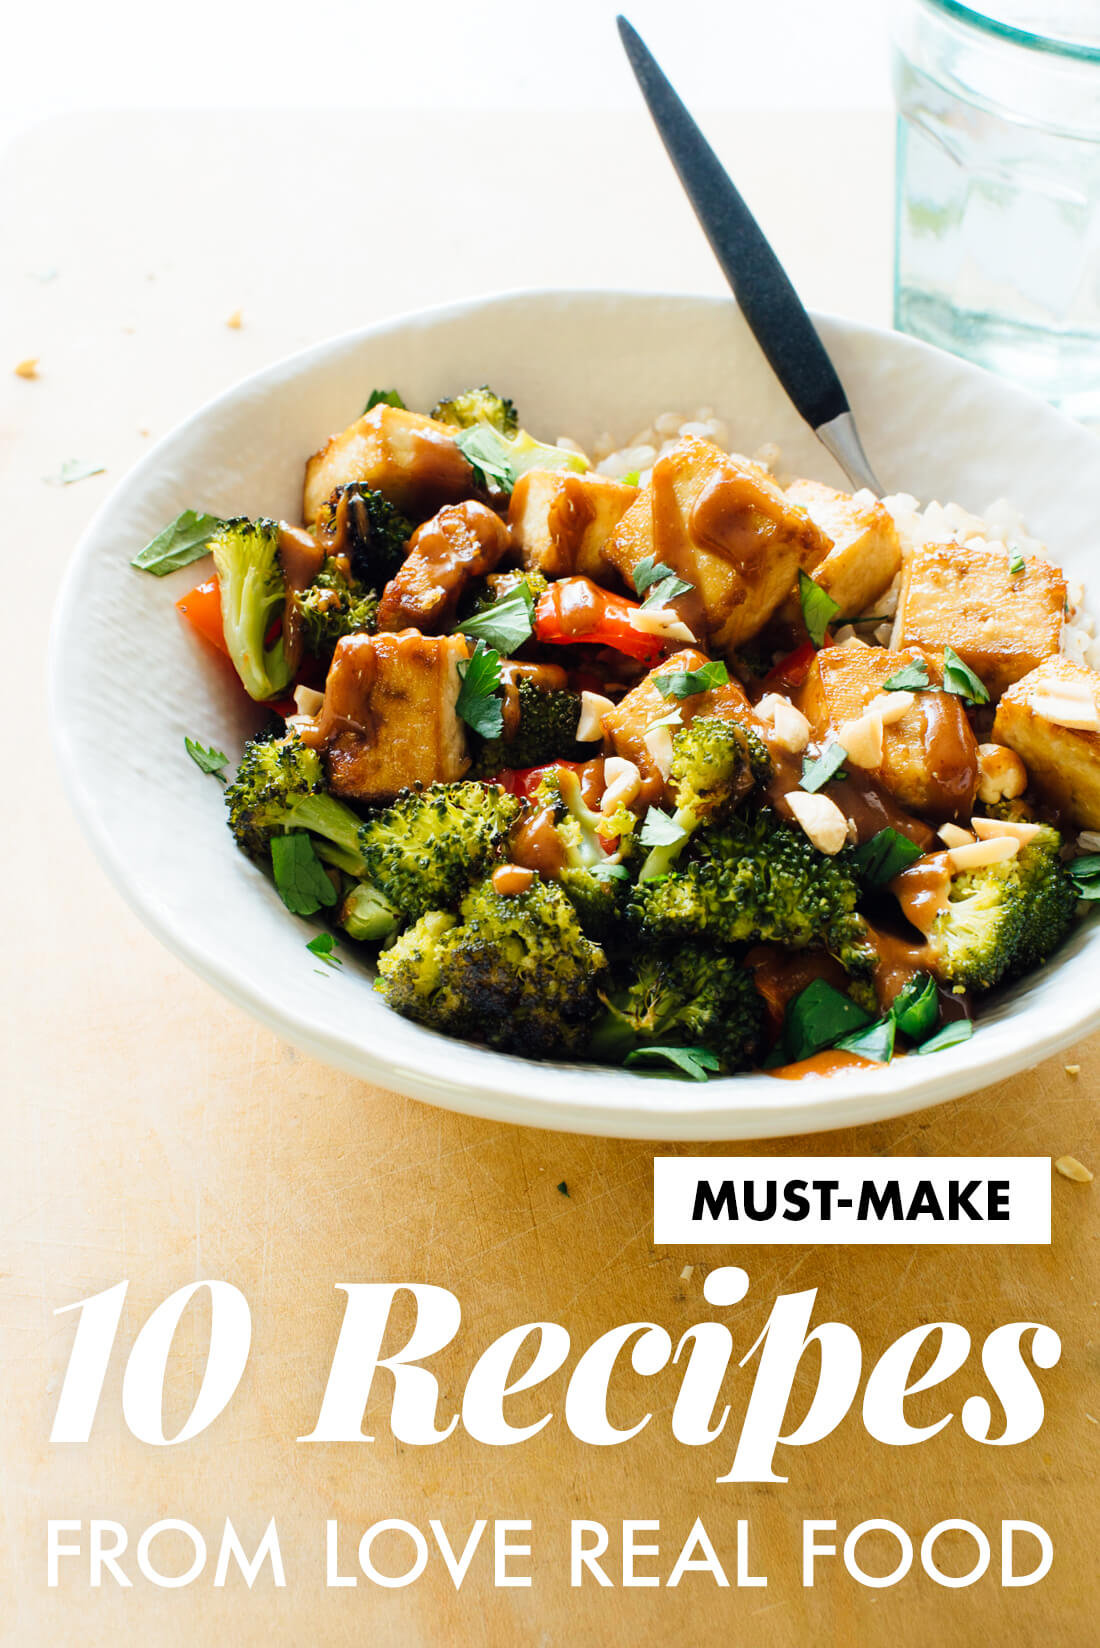 10 recipes from my cookbook, Love Real Food